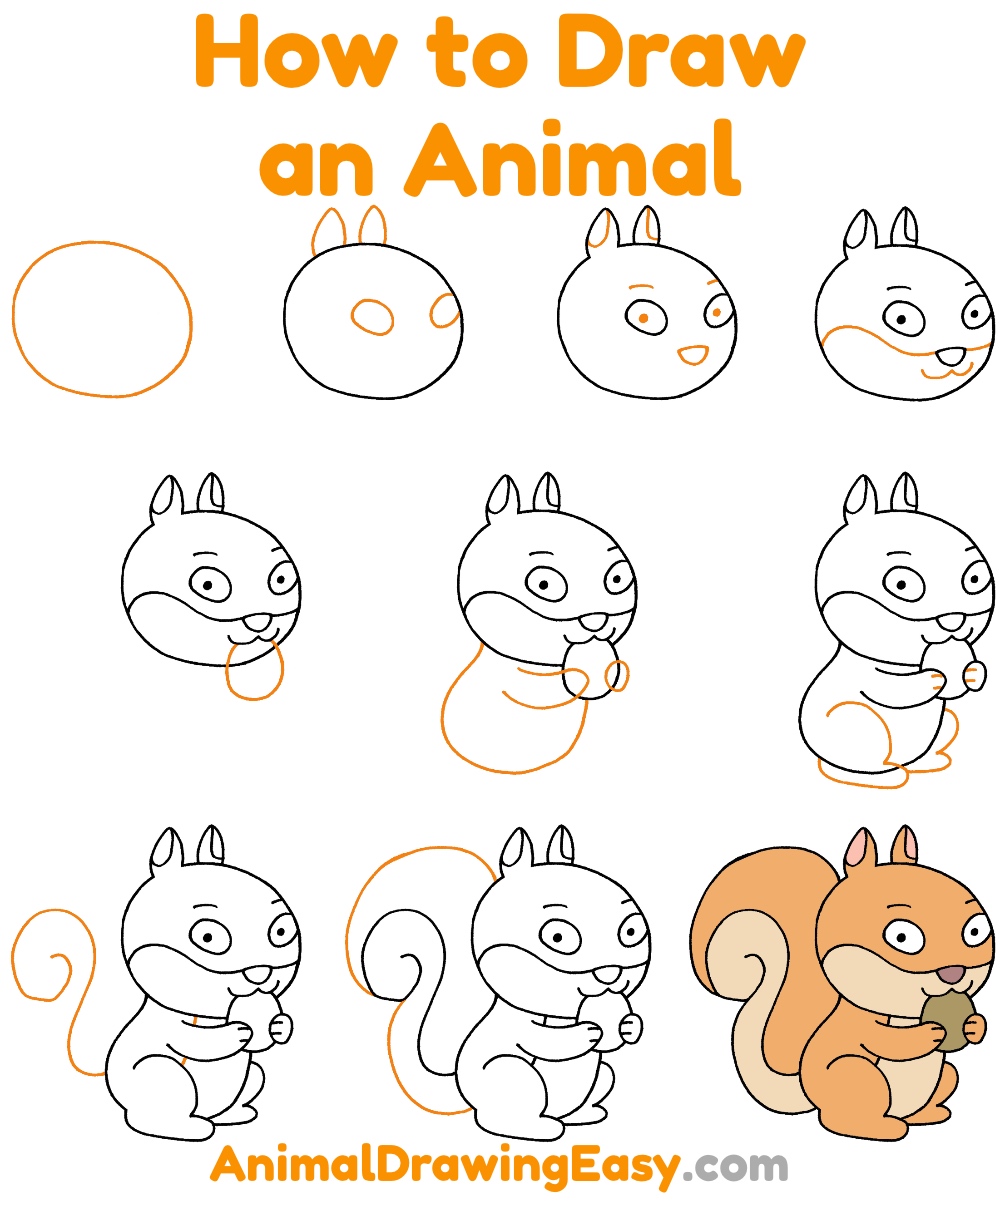 How to Draw an Animal Step by Step